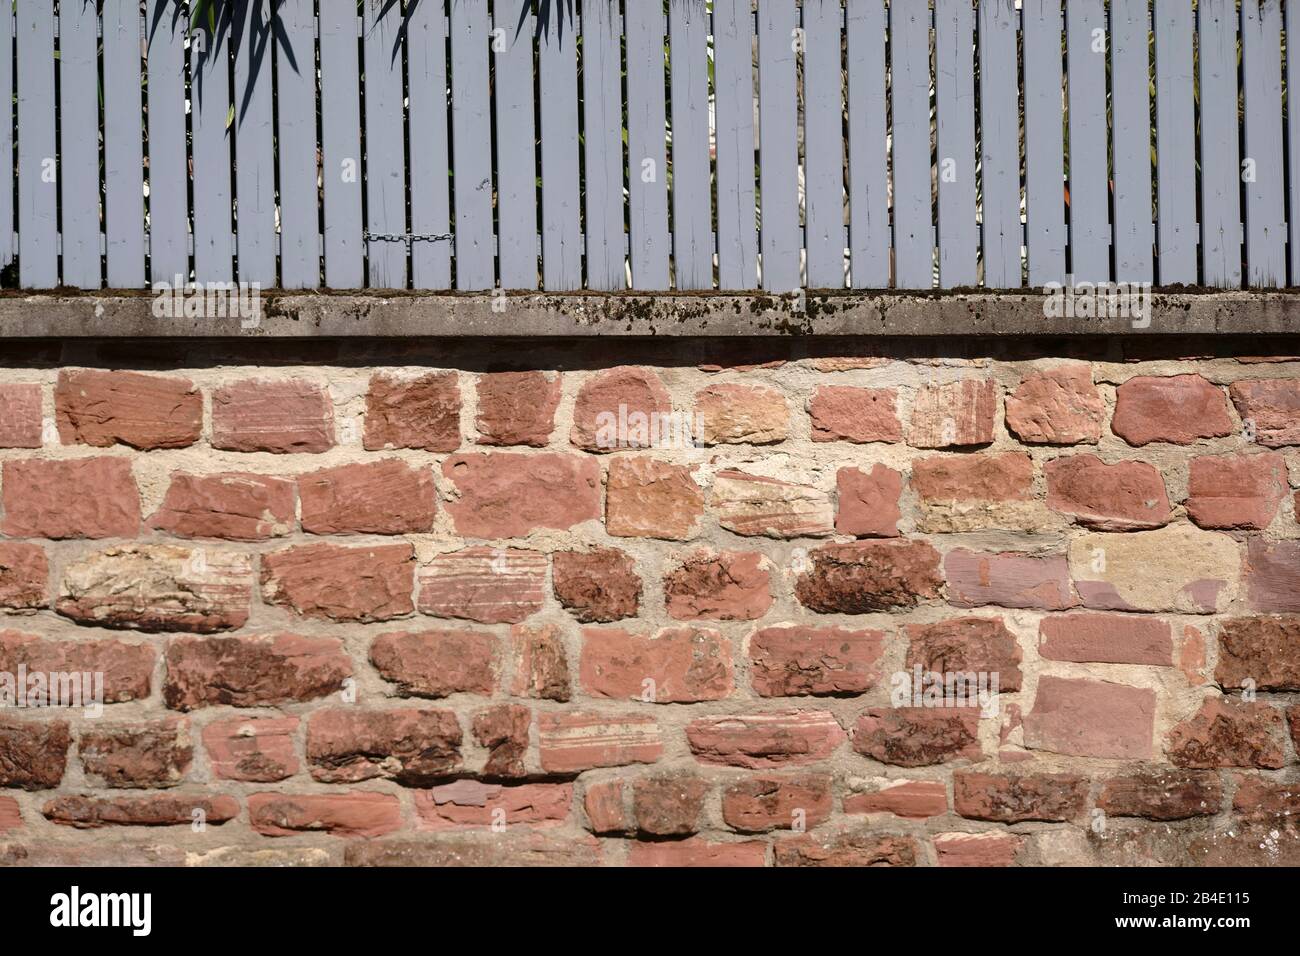 A rustic wall of staggered and broken bricks with a wooden fence. Stock Photo